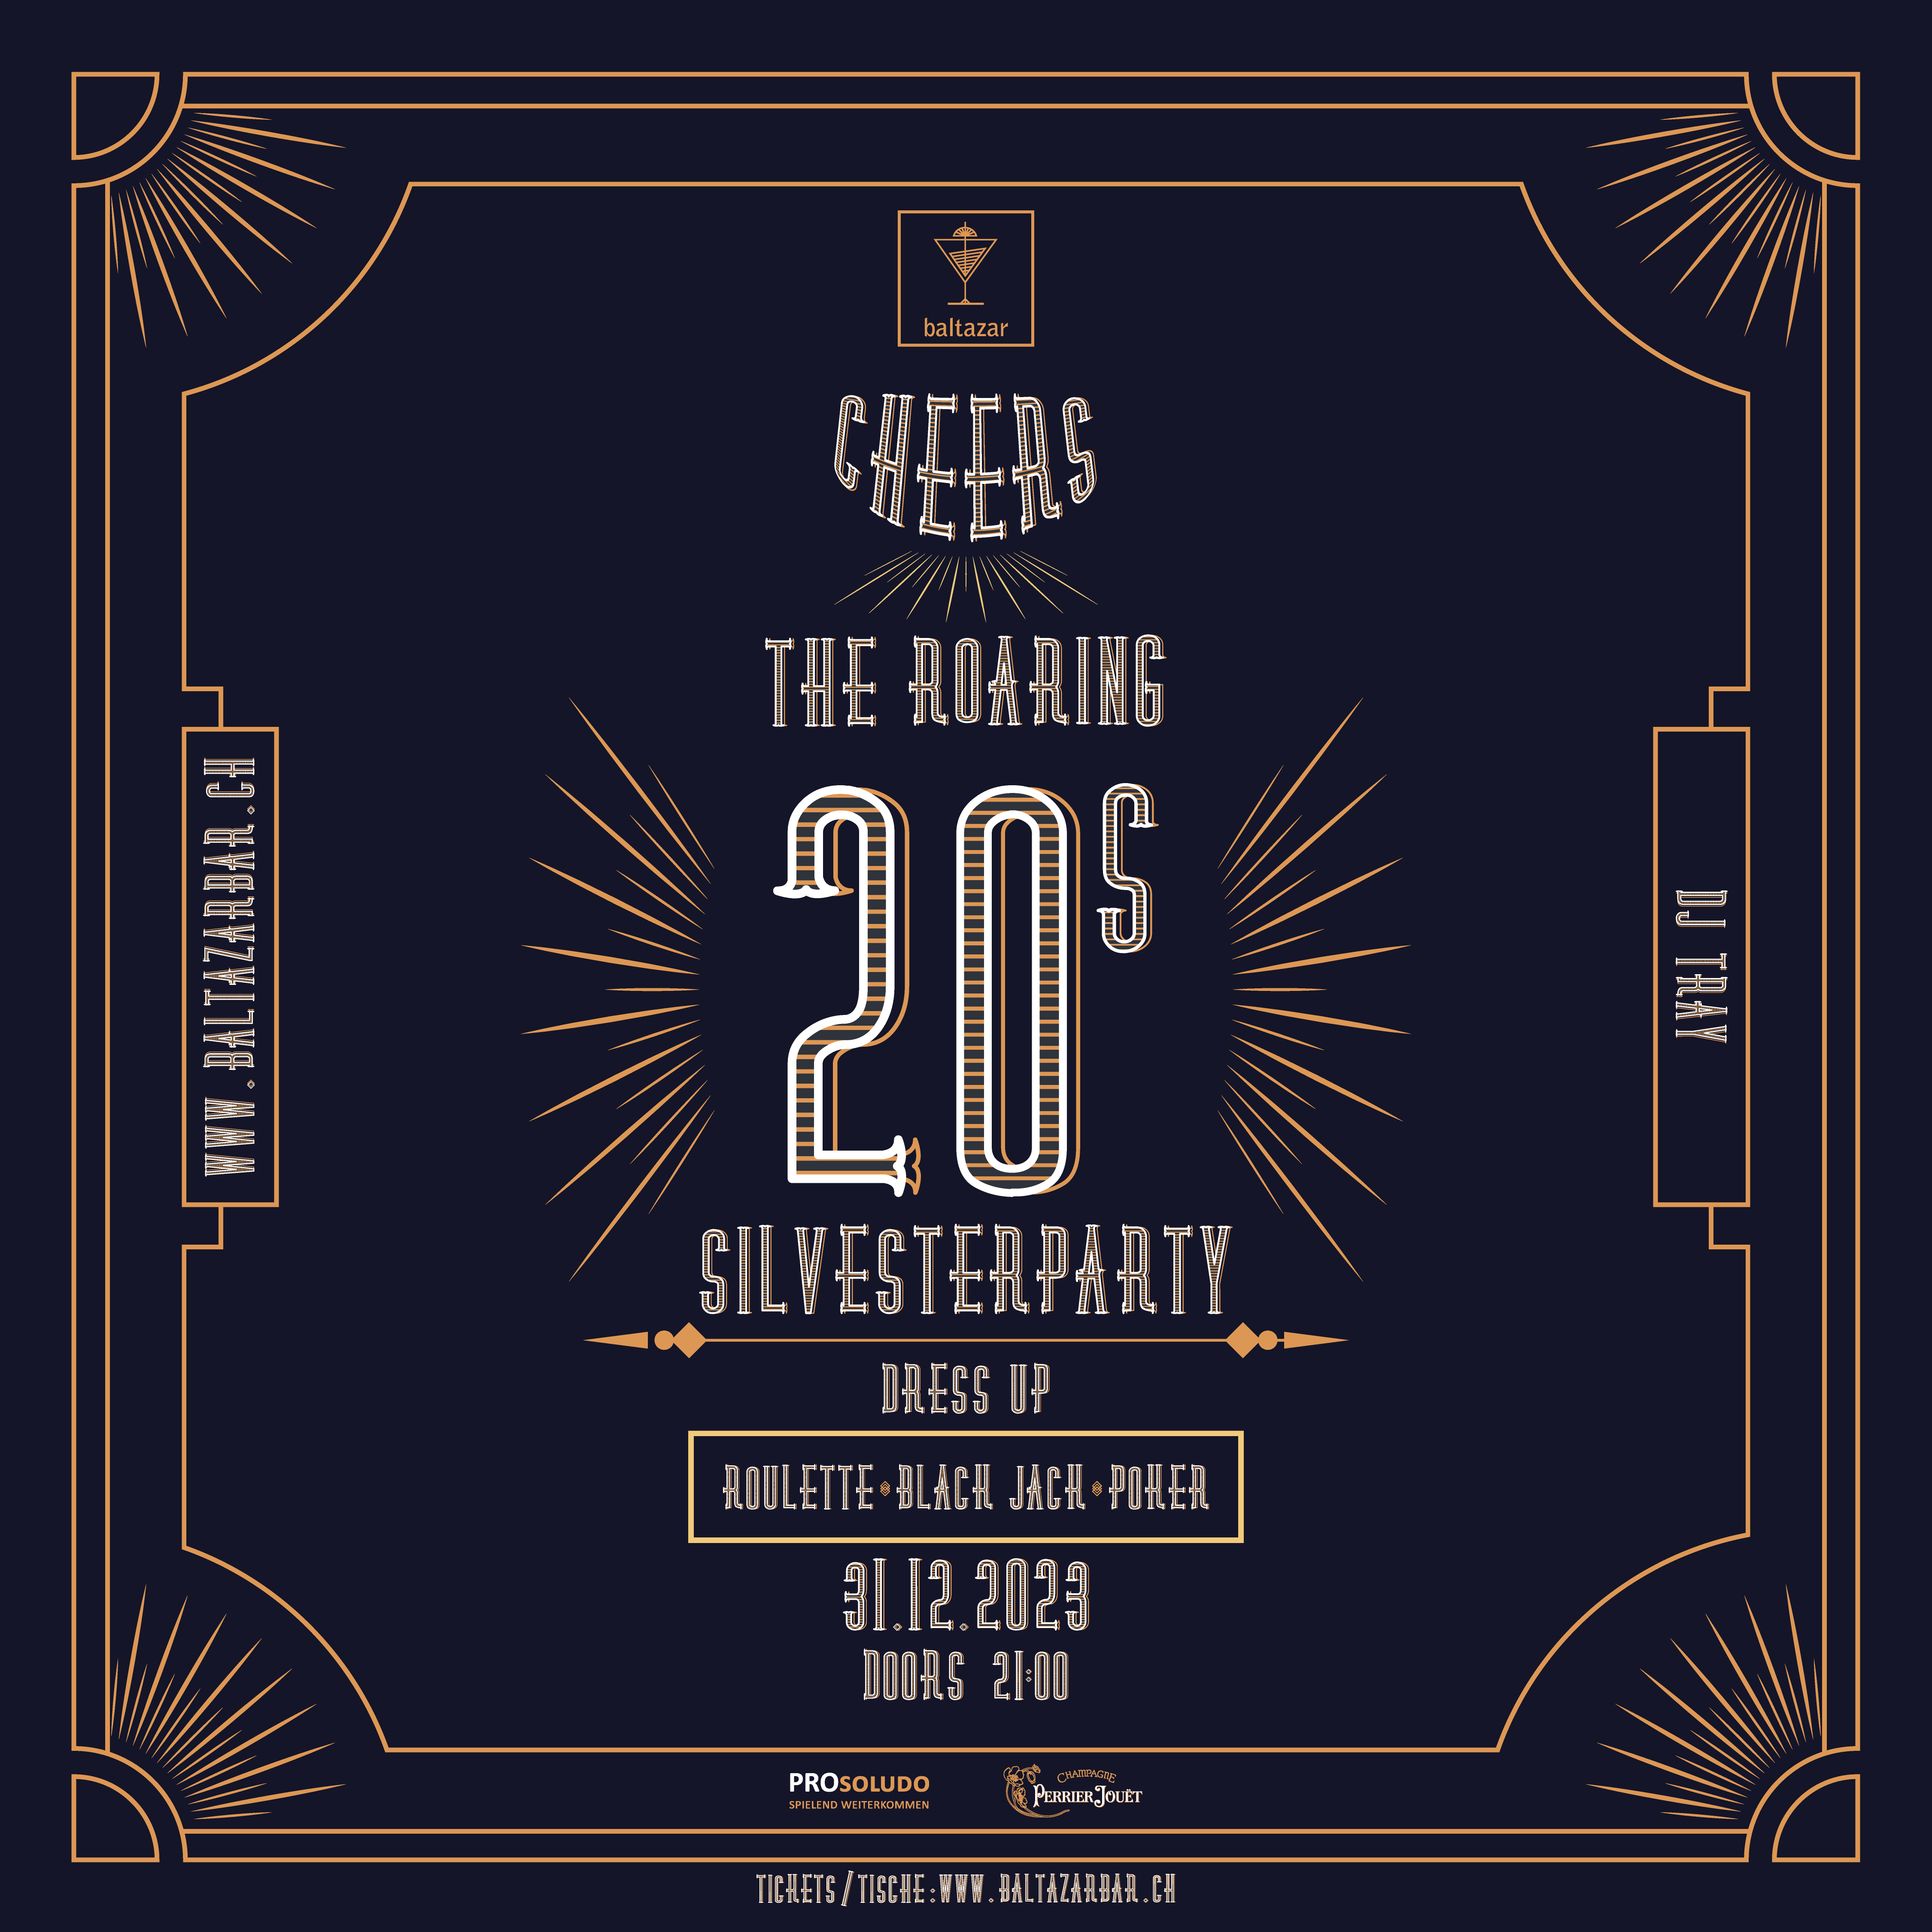 The Roaring 20s - Silverster Party